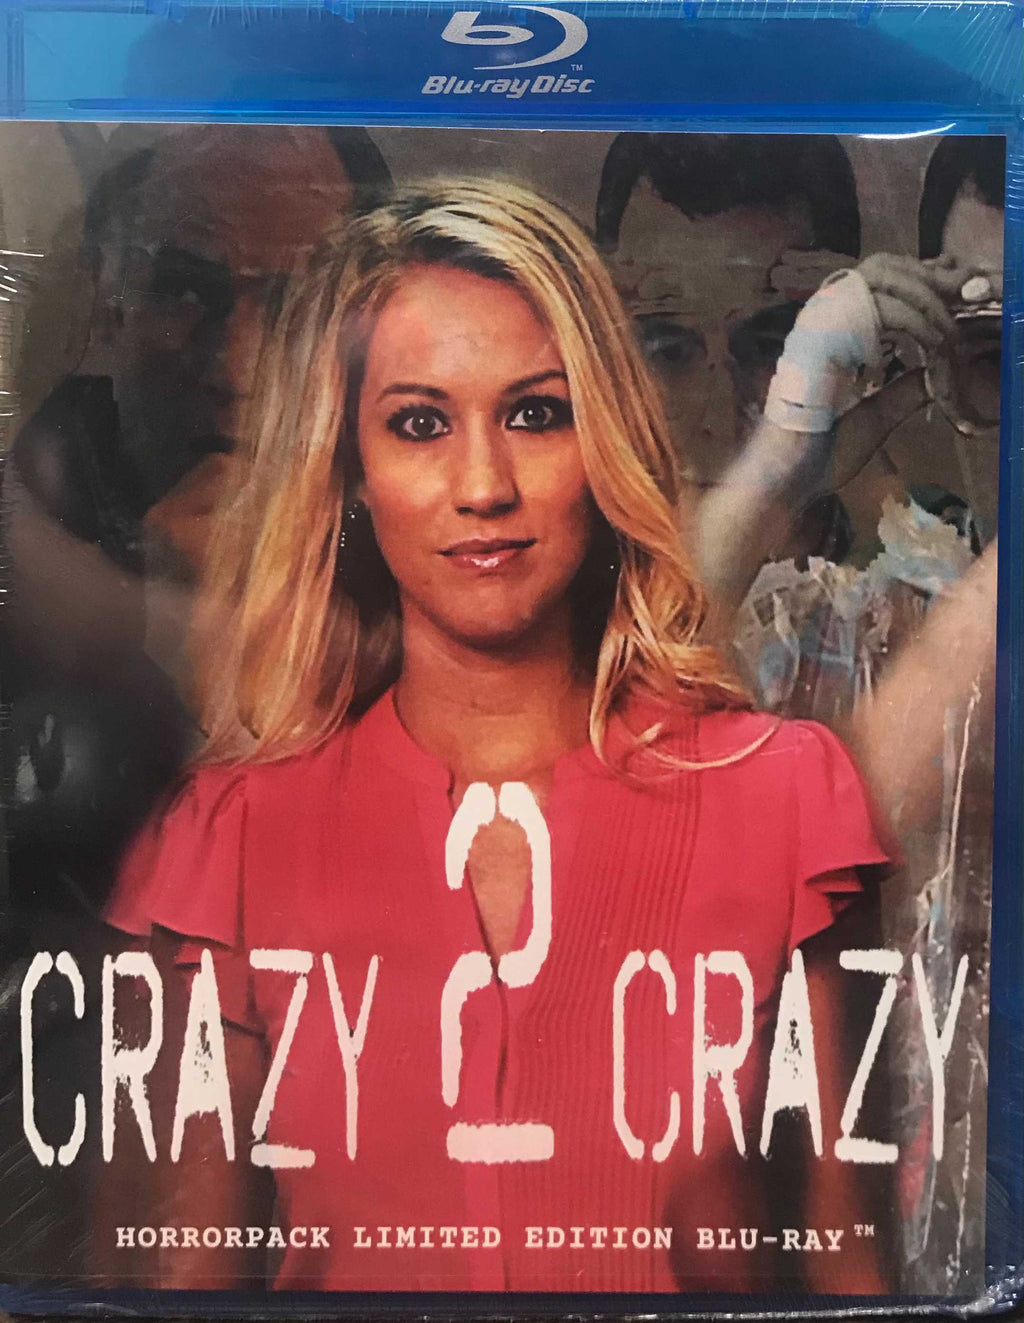 Crazy 2 Crazy - HorrorPack Limited Edition Blu-ray #55